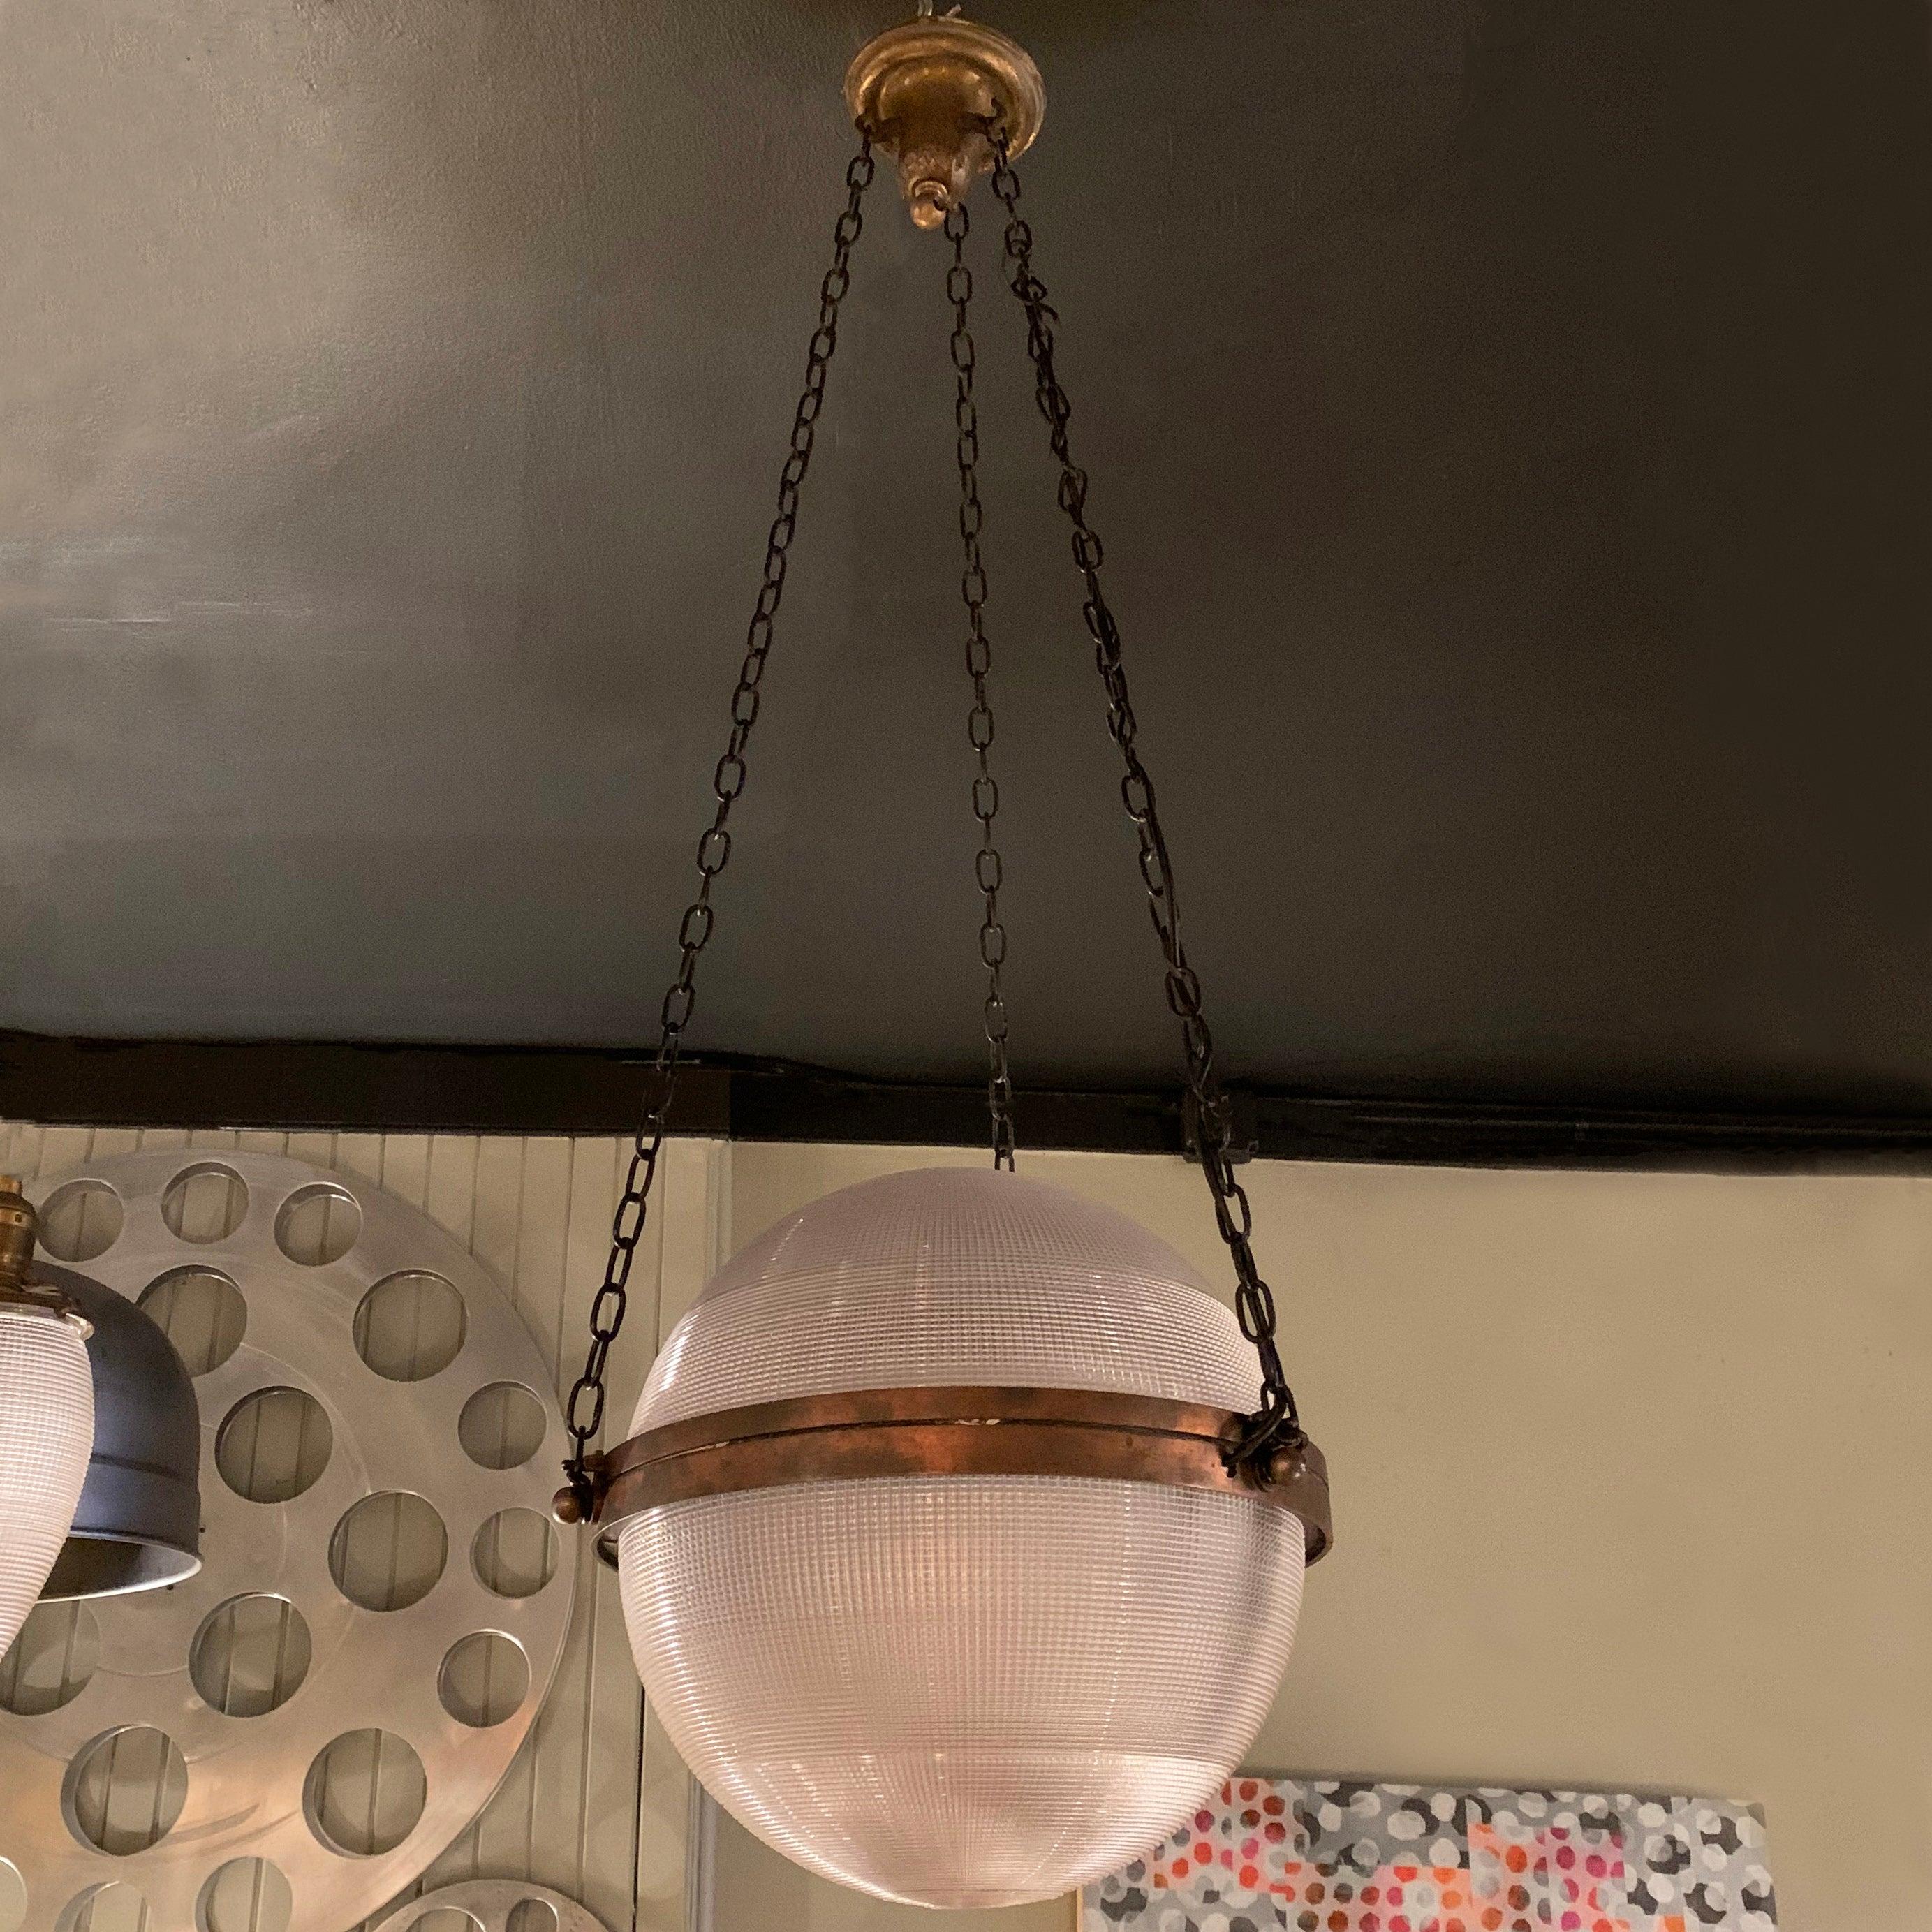 Outstanding, large, early 20th century, pharmacy pendant light features a 12 inch diameter, prismatic, Holophane glass globe shade with brass band suspended with 3 chains from a matching brass canopy. The pendant is newly wired to accept up to a 200